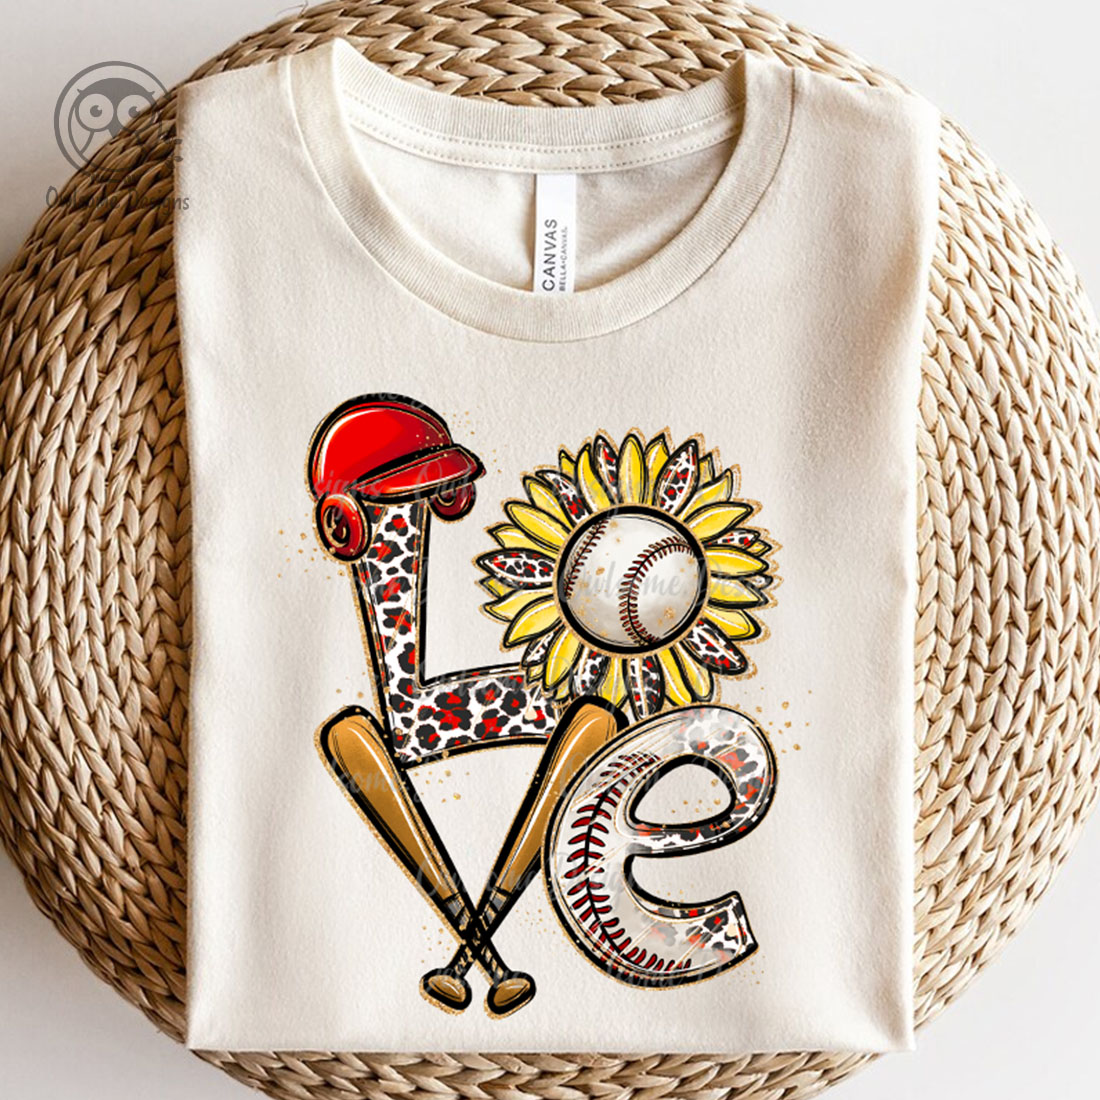 Image of a T-shirt with a beautiful inscription Love with baseball elements.